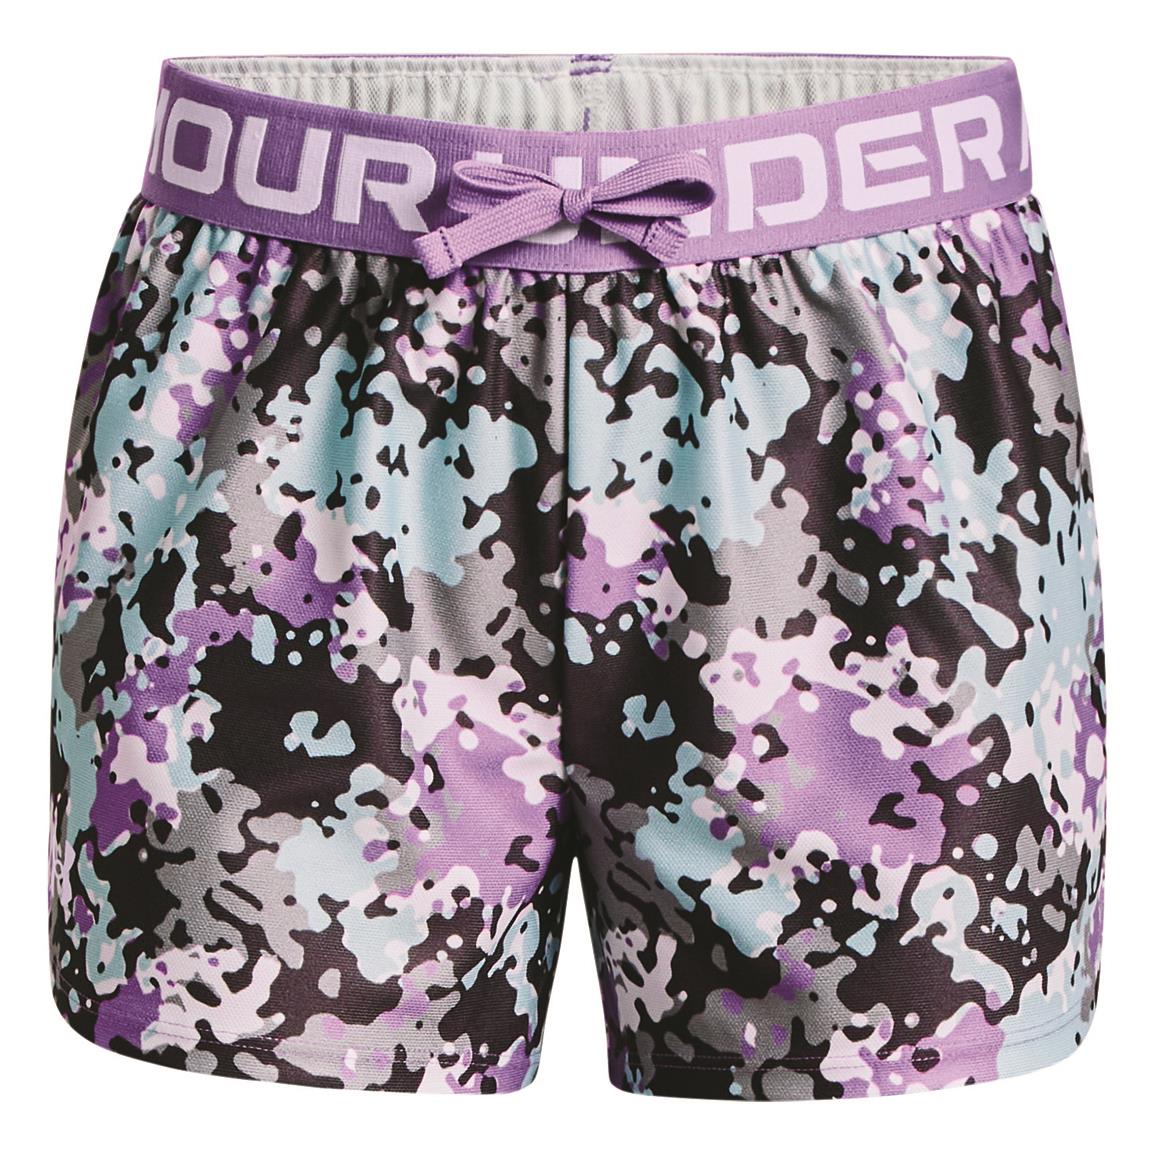 Under Armour Girls' Play Up Printed Shorts, Vivid Lilac/jet Gray/white